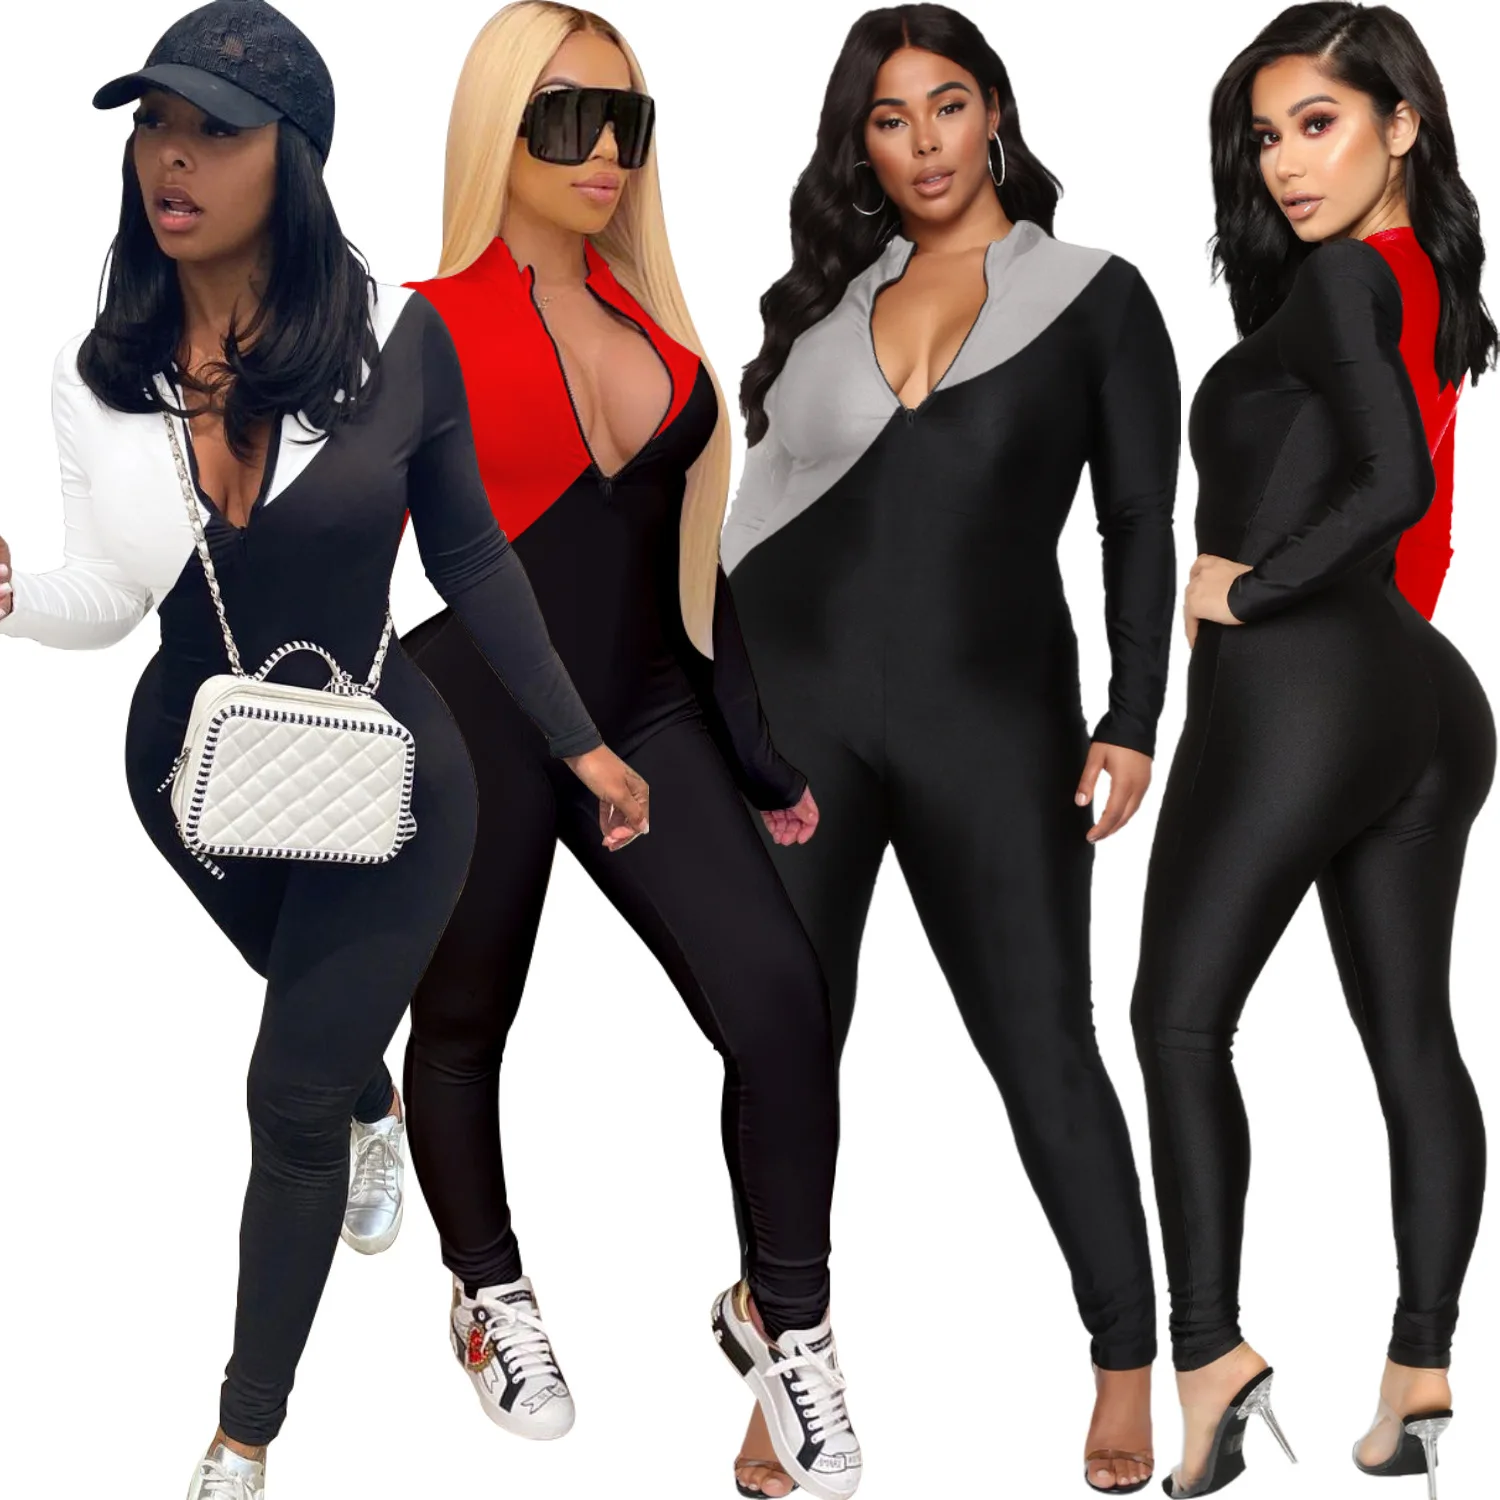 Trendying sexy color contrast fitness wear biker body suit one piece 2021 fall new design long sleeve women jumpsuit with zipper, Picture